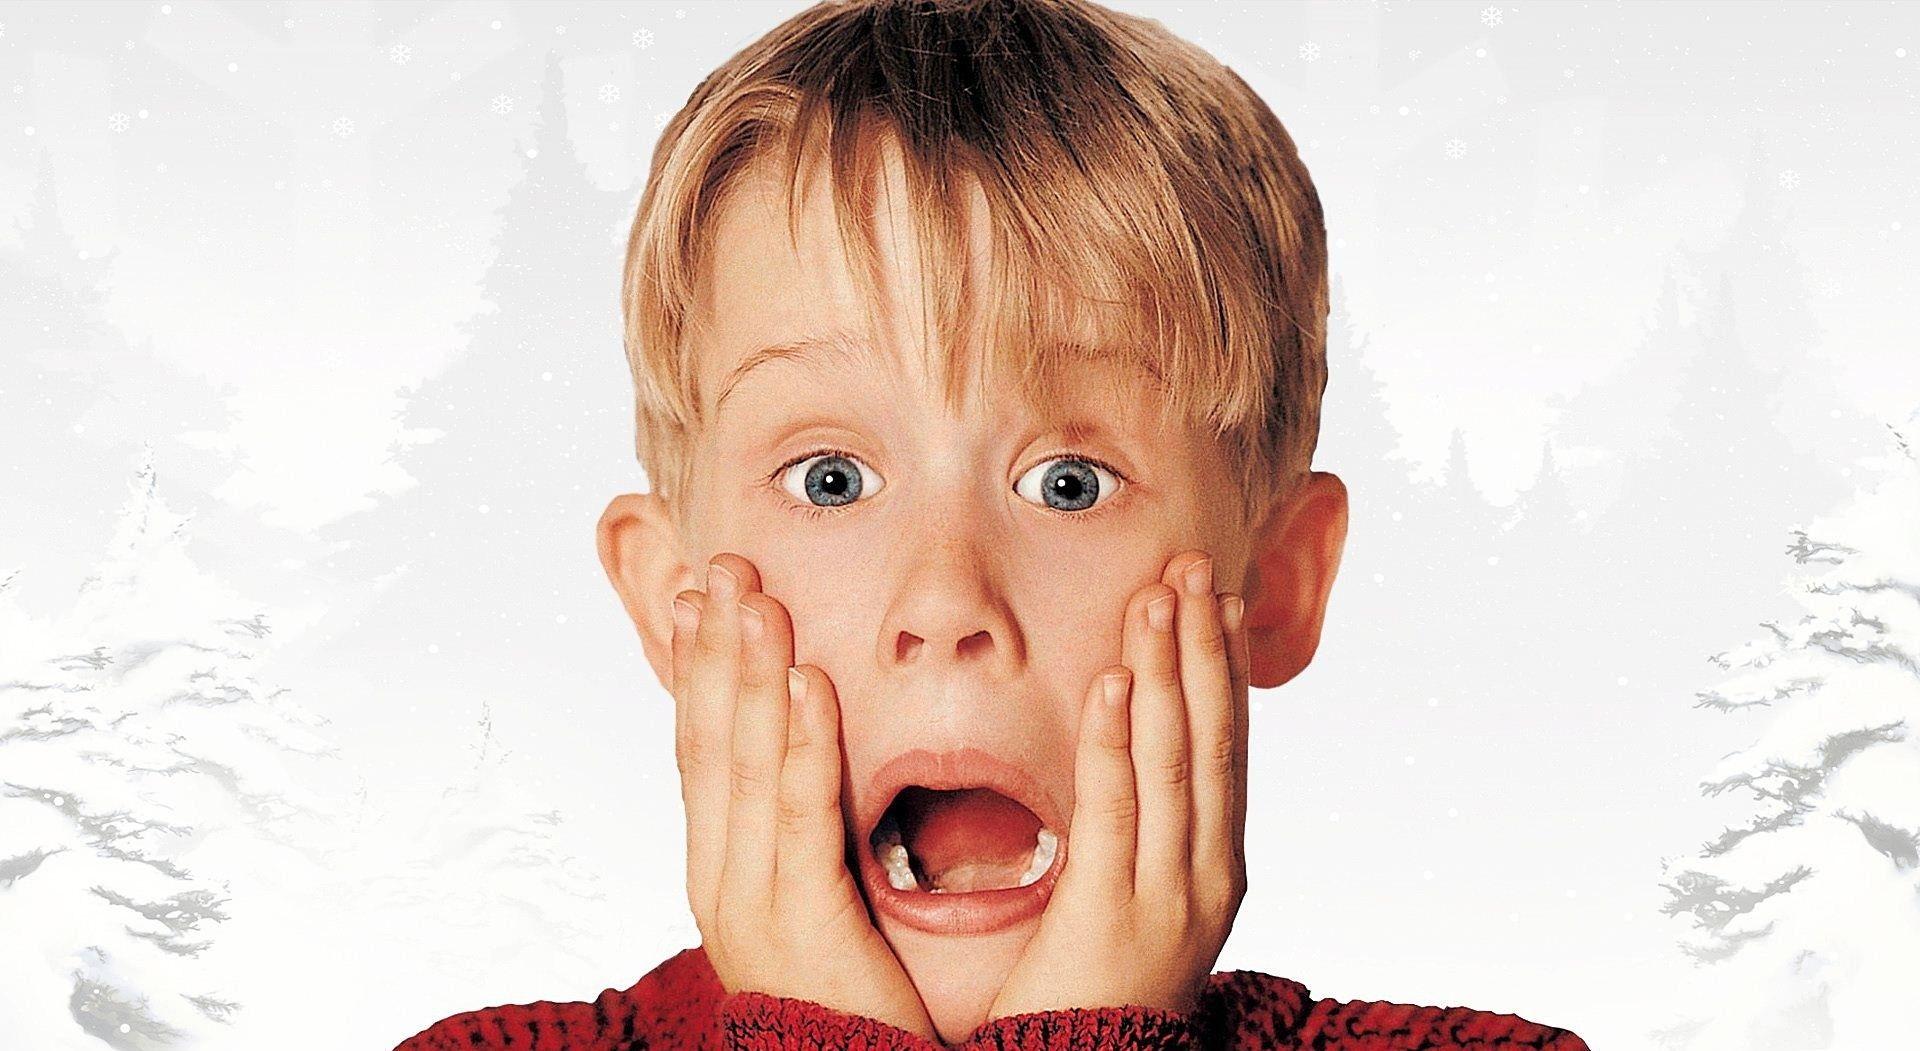 Home alone 1080P 2K 4K 5K HD wallpapers free download  Wallpaper Flare